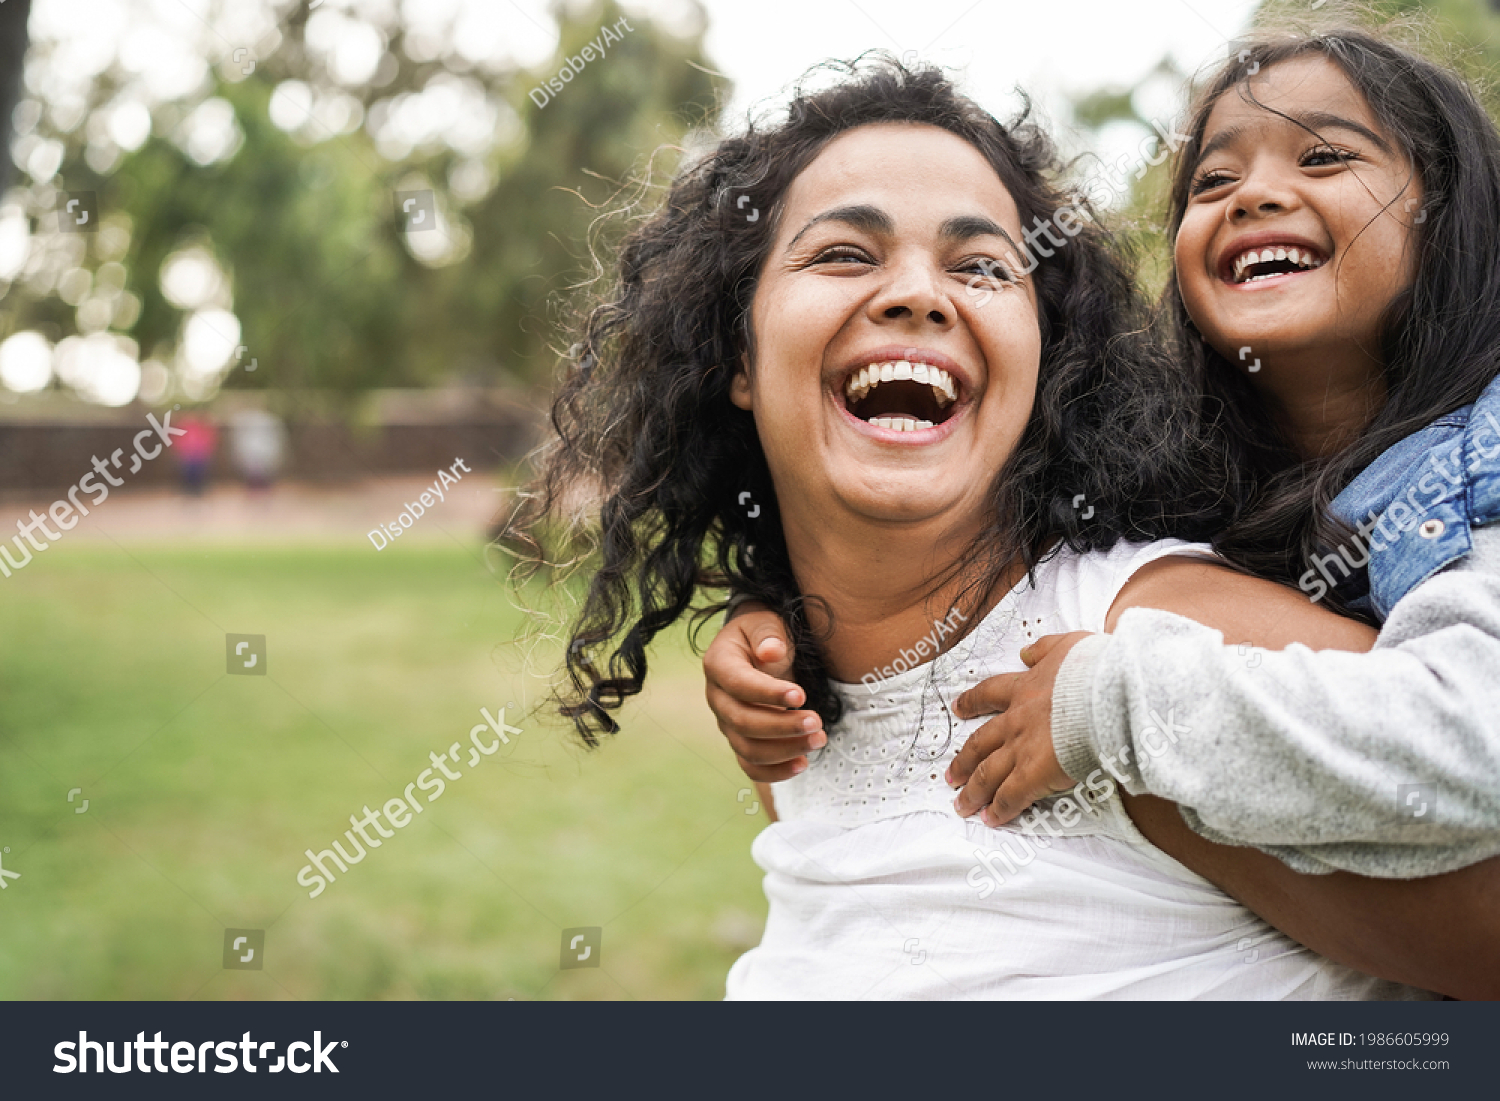 Happy indian mother having fun with her daughter outdoor - Family and love concept - Focus on mum face #1986605999